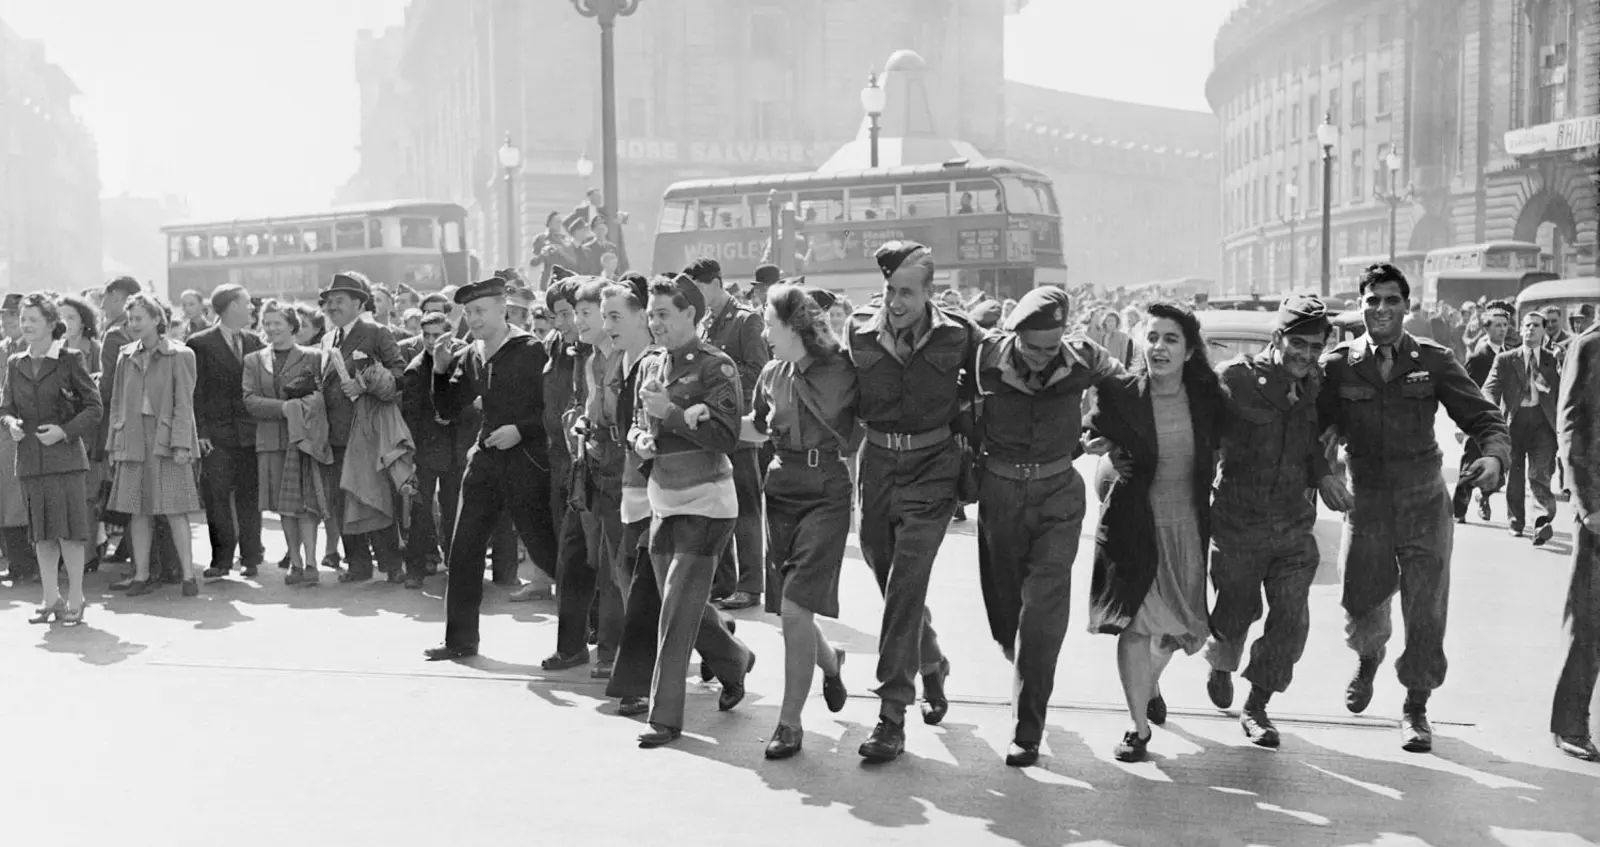 Civilians and service personnel in London celebrate the news of Allied Victory over Japan in August 1945